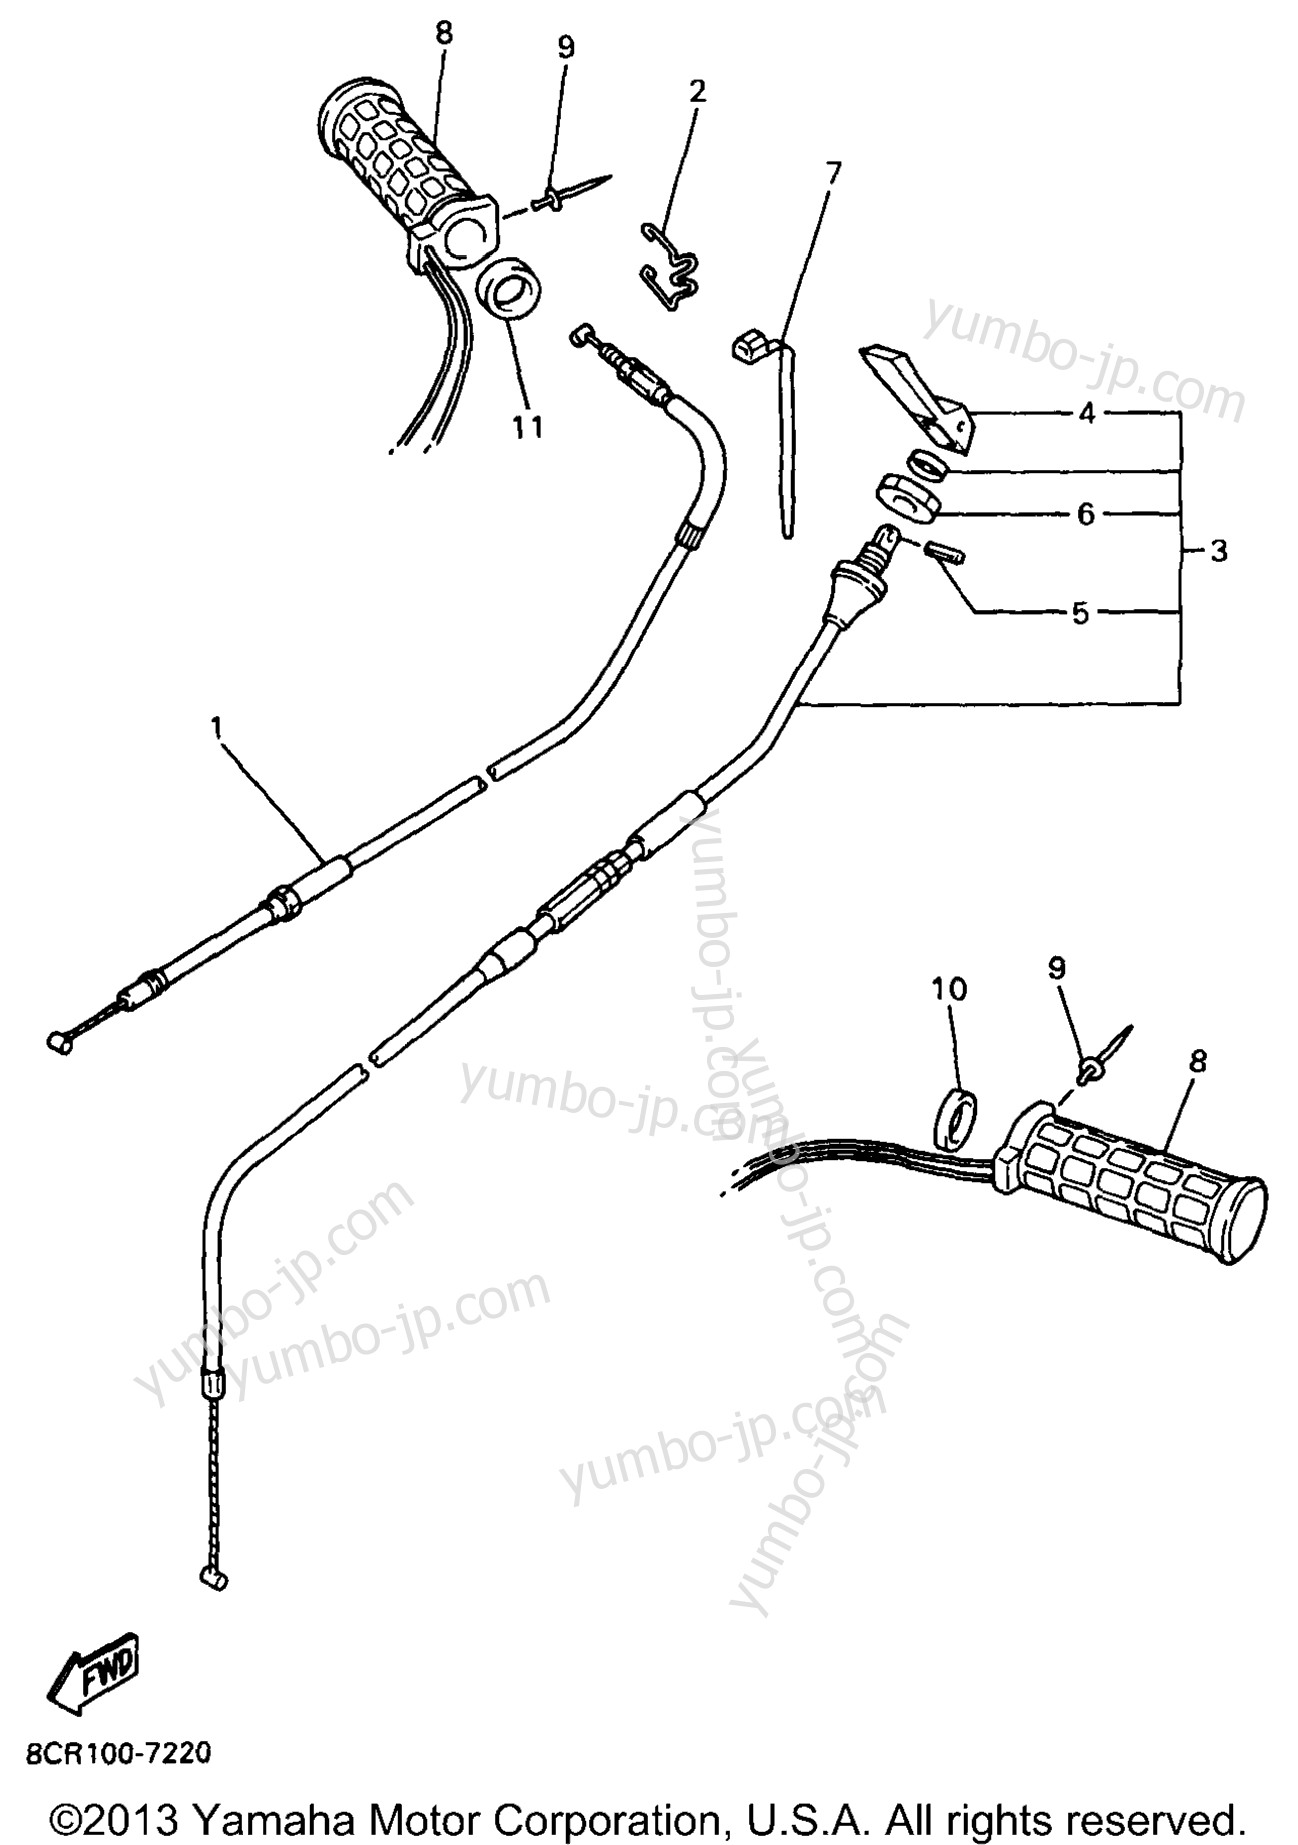 CONTROL CABLE for snowmobiles YAMAHA VMAX 600 XTR (ELEC START+REVERSE) (VX600XTRB) 1998 year